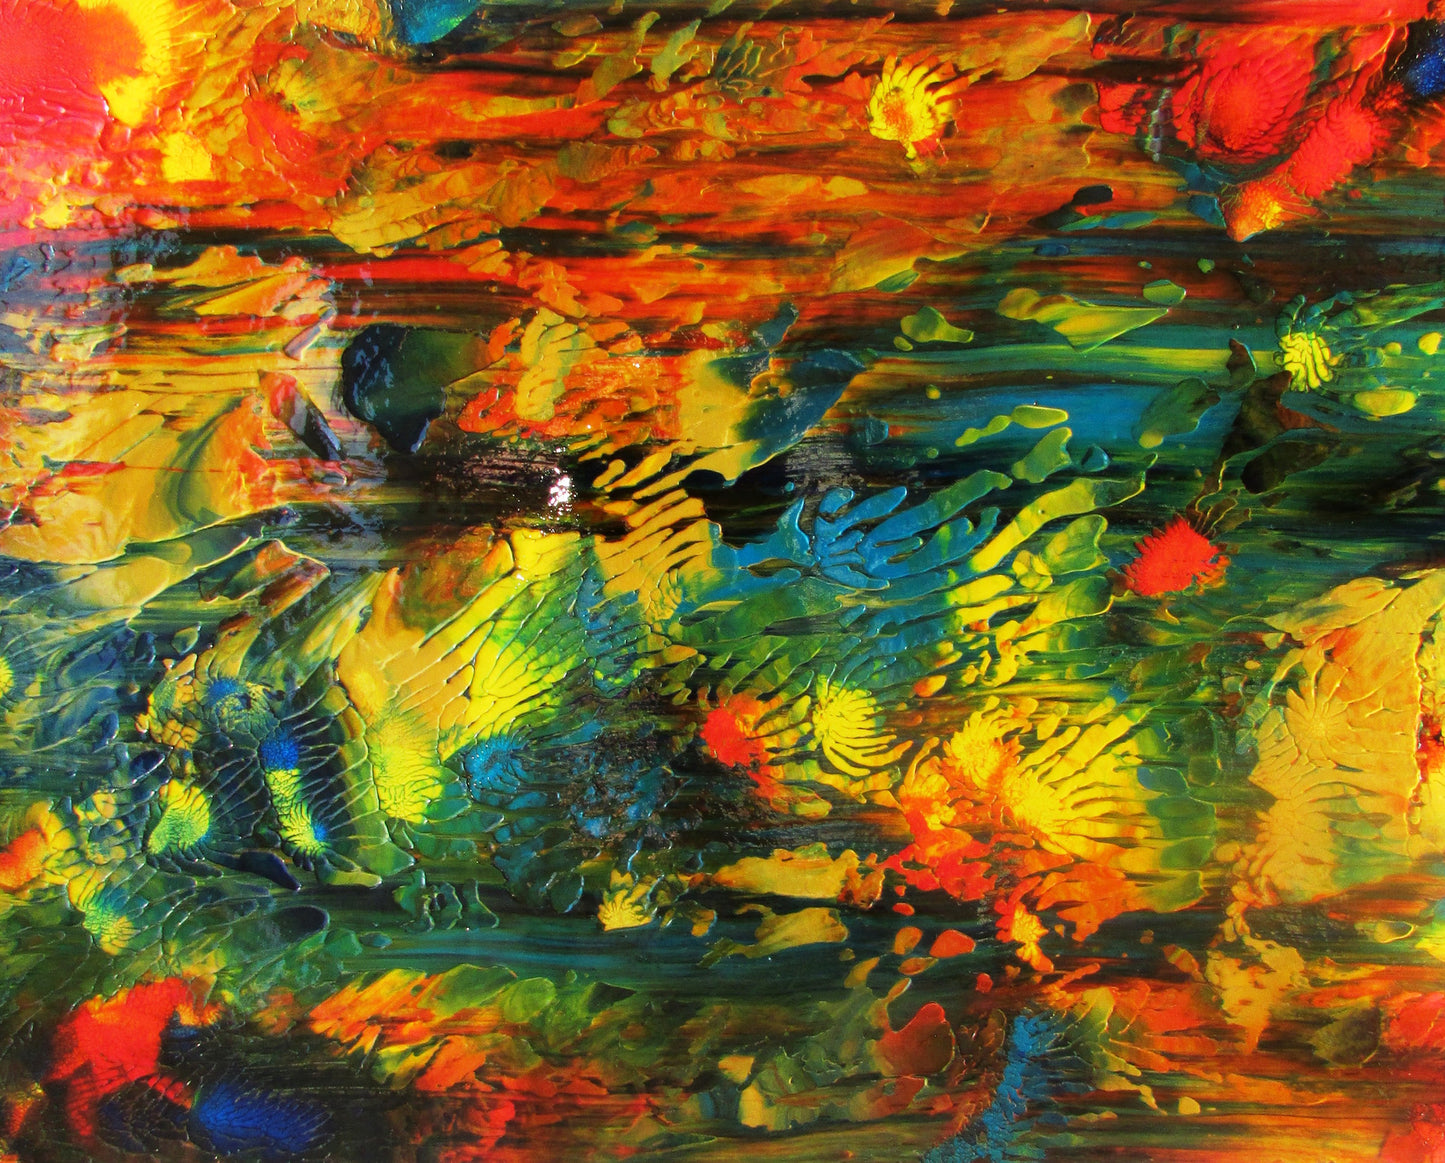 Abstract Sun Shining through the Forest Original Painting